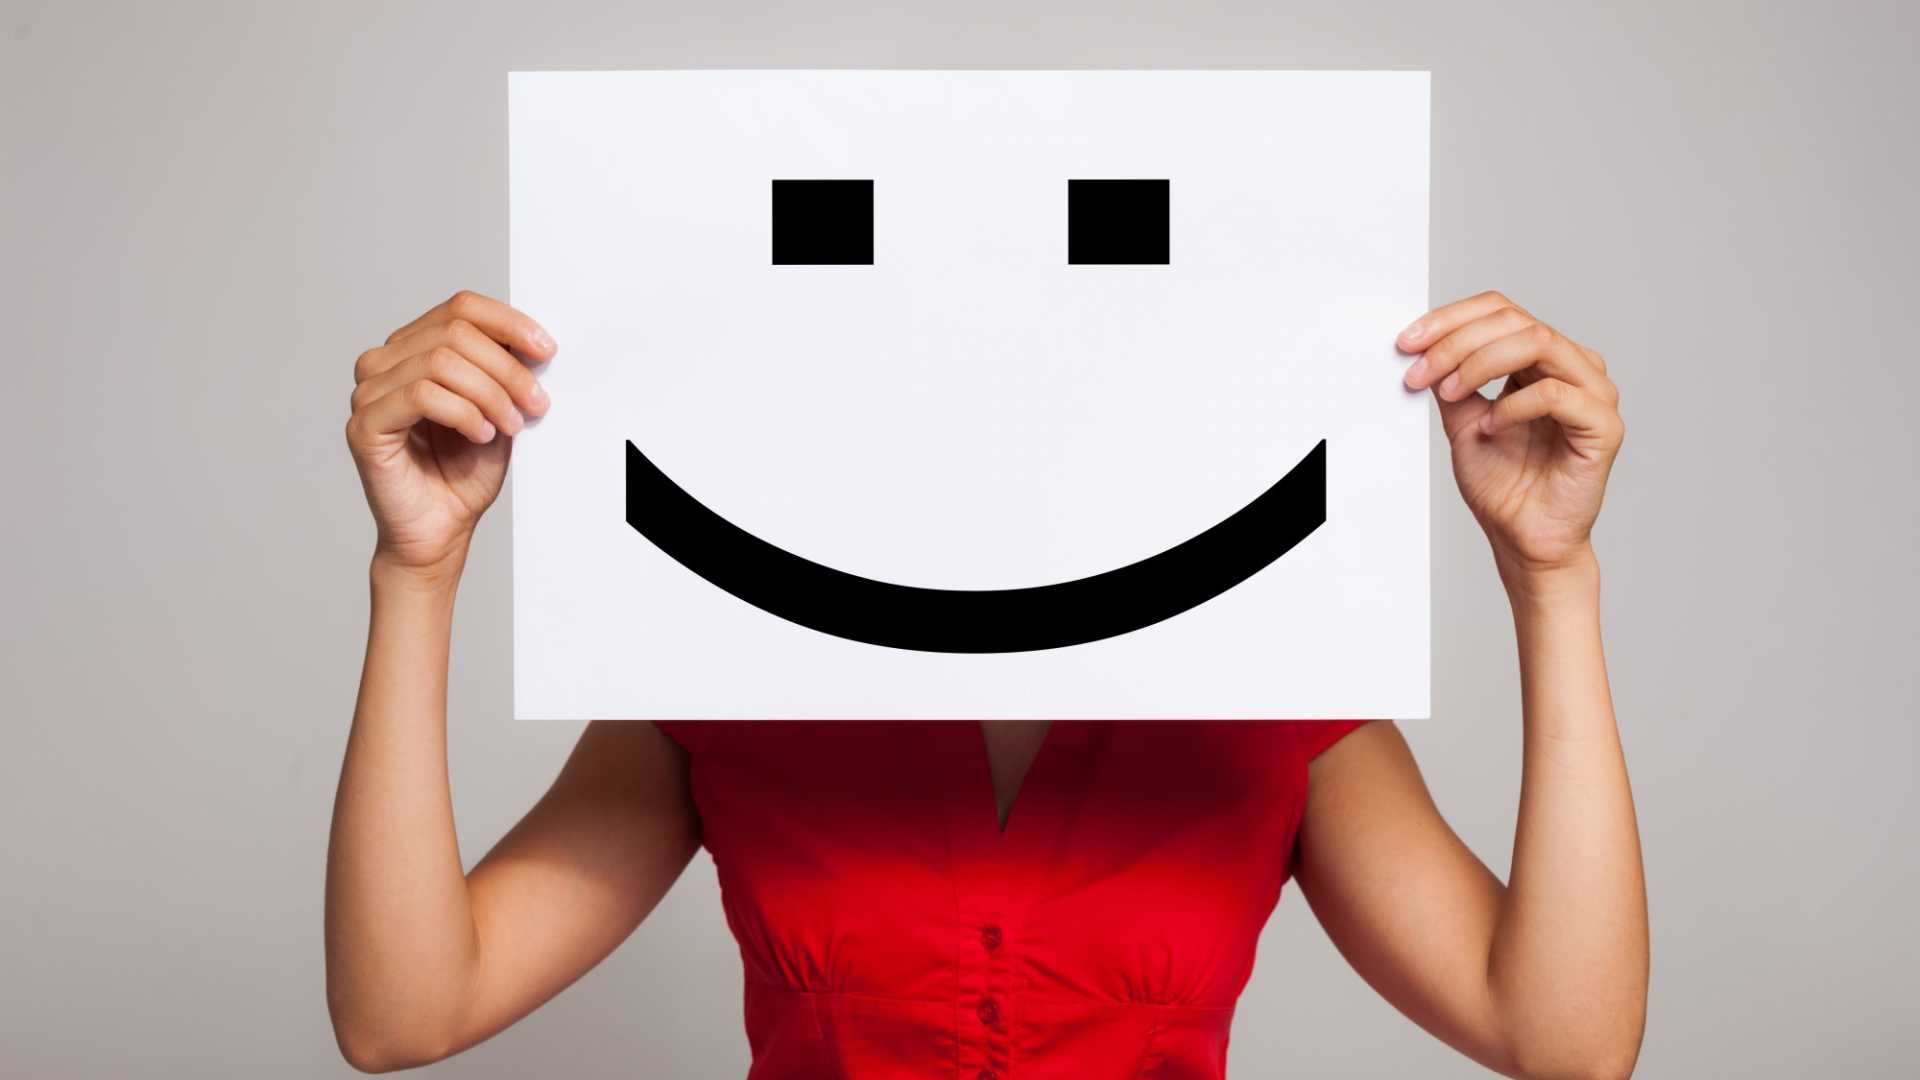 A woman holding a smiley face image in front of her face